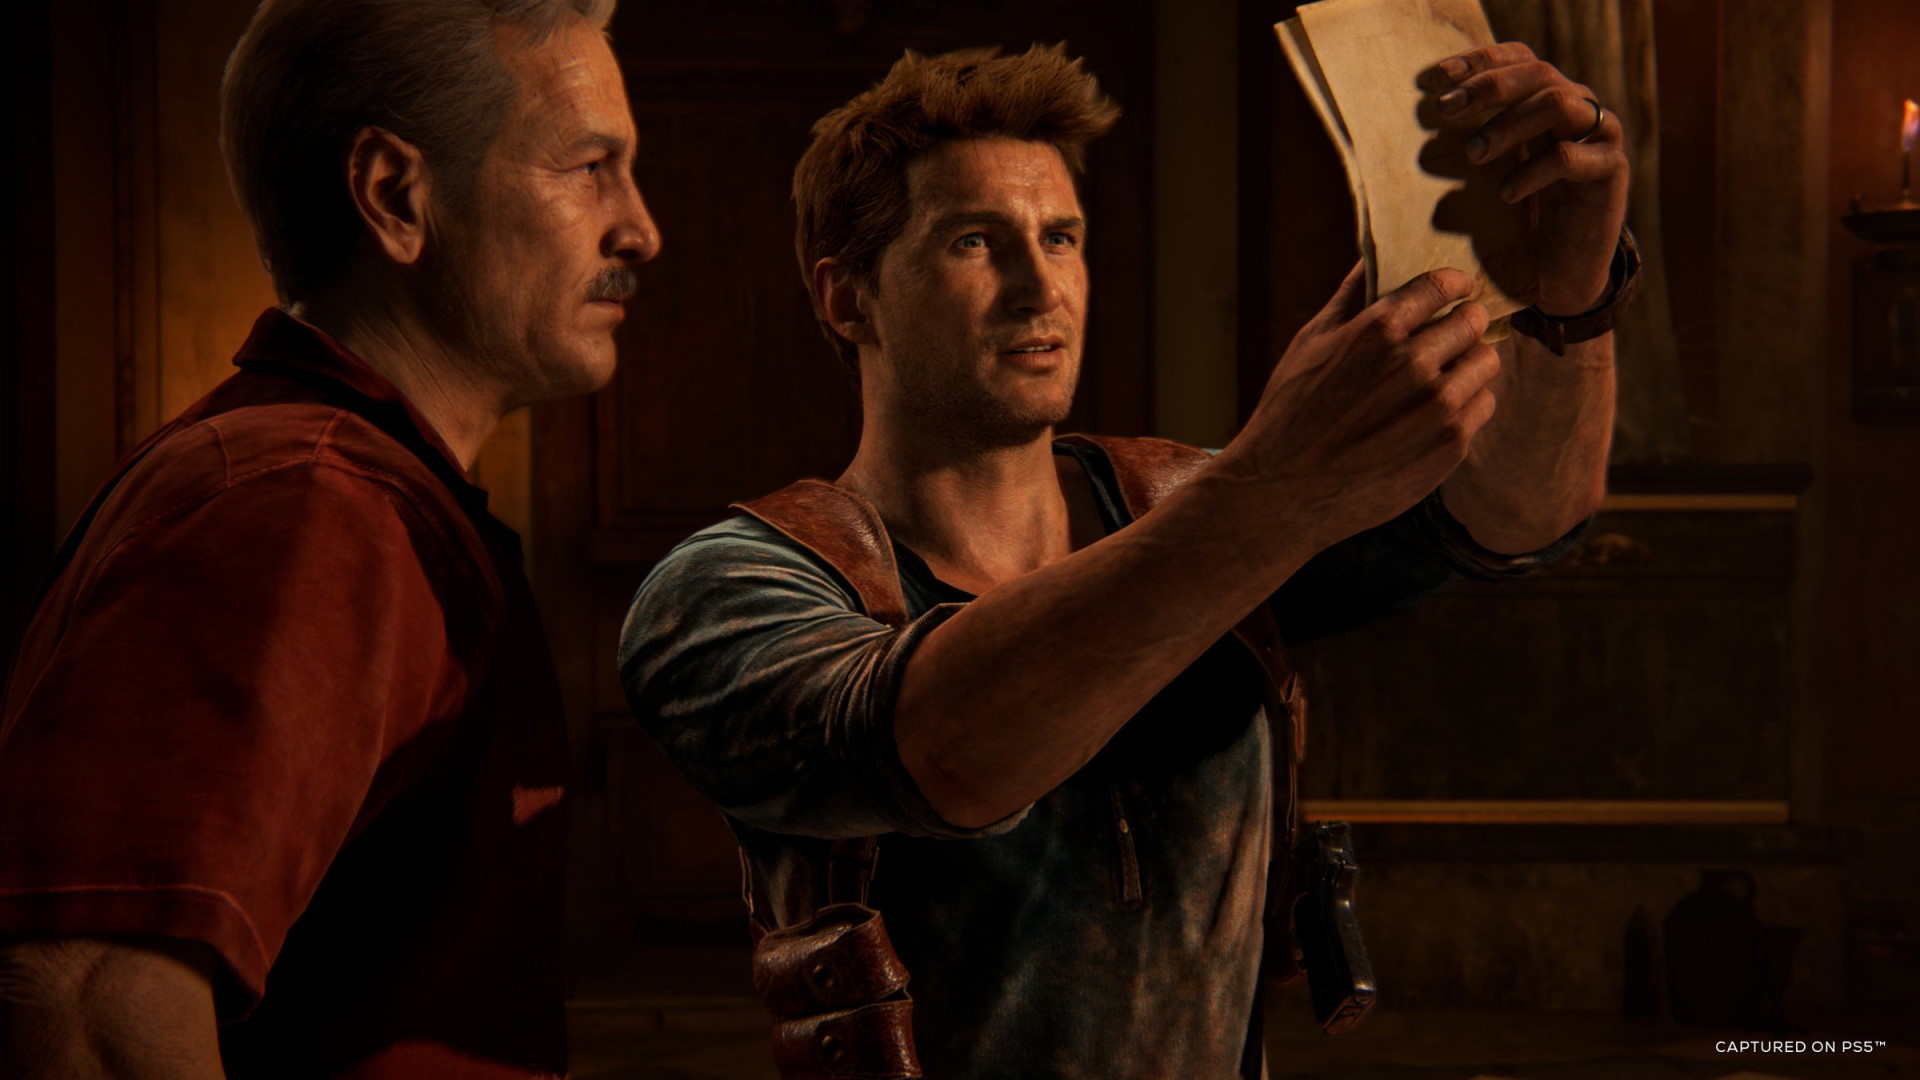 Naughty Dog Has 'Moved On' From Uncharted, The Last of Us Part III Is Up to  the Studio